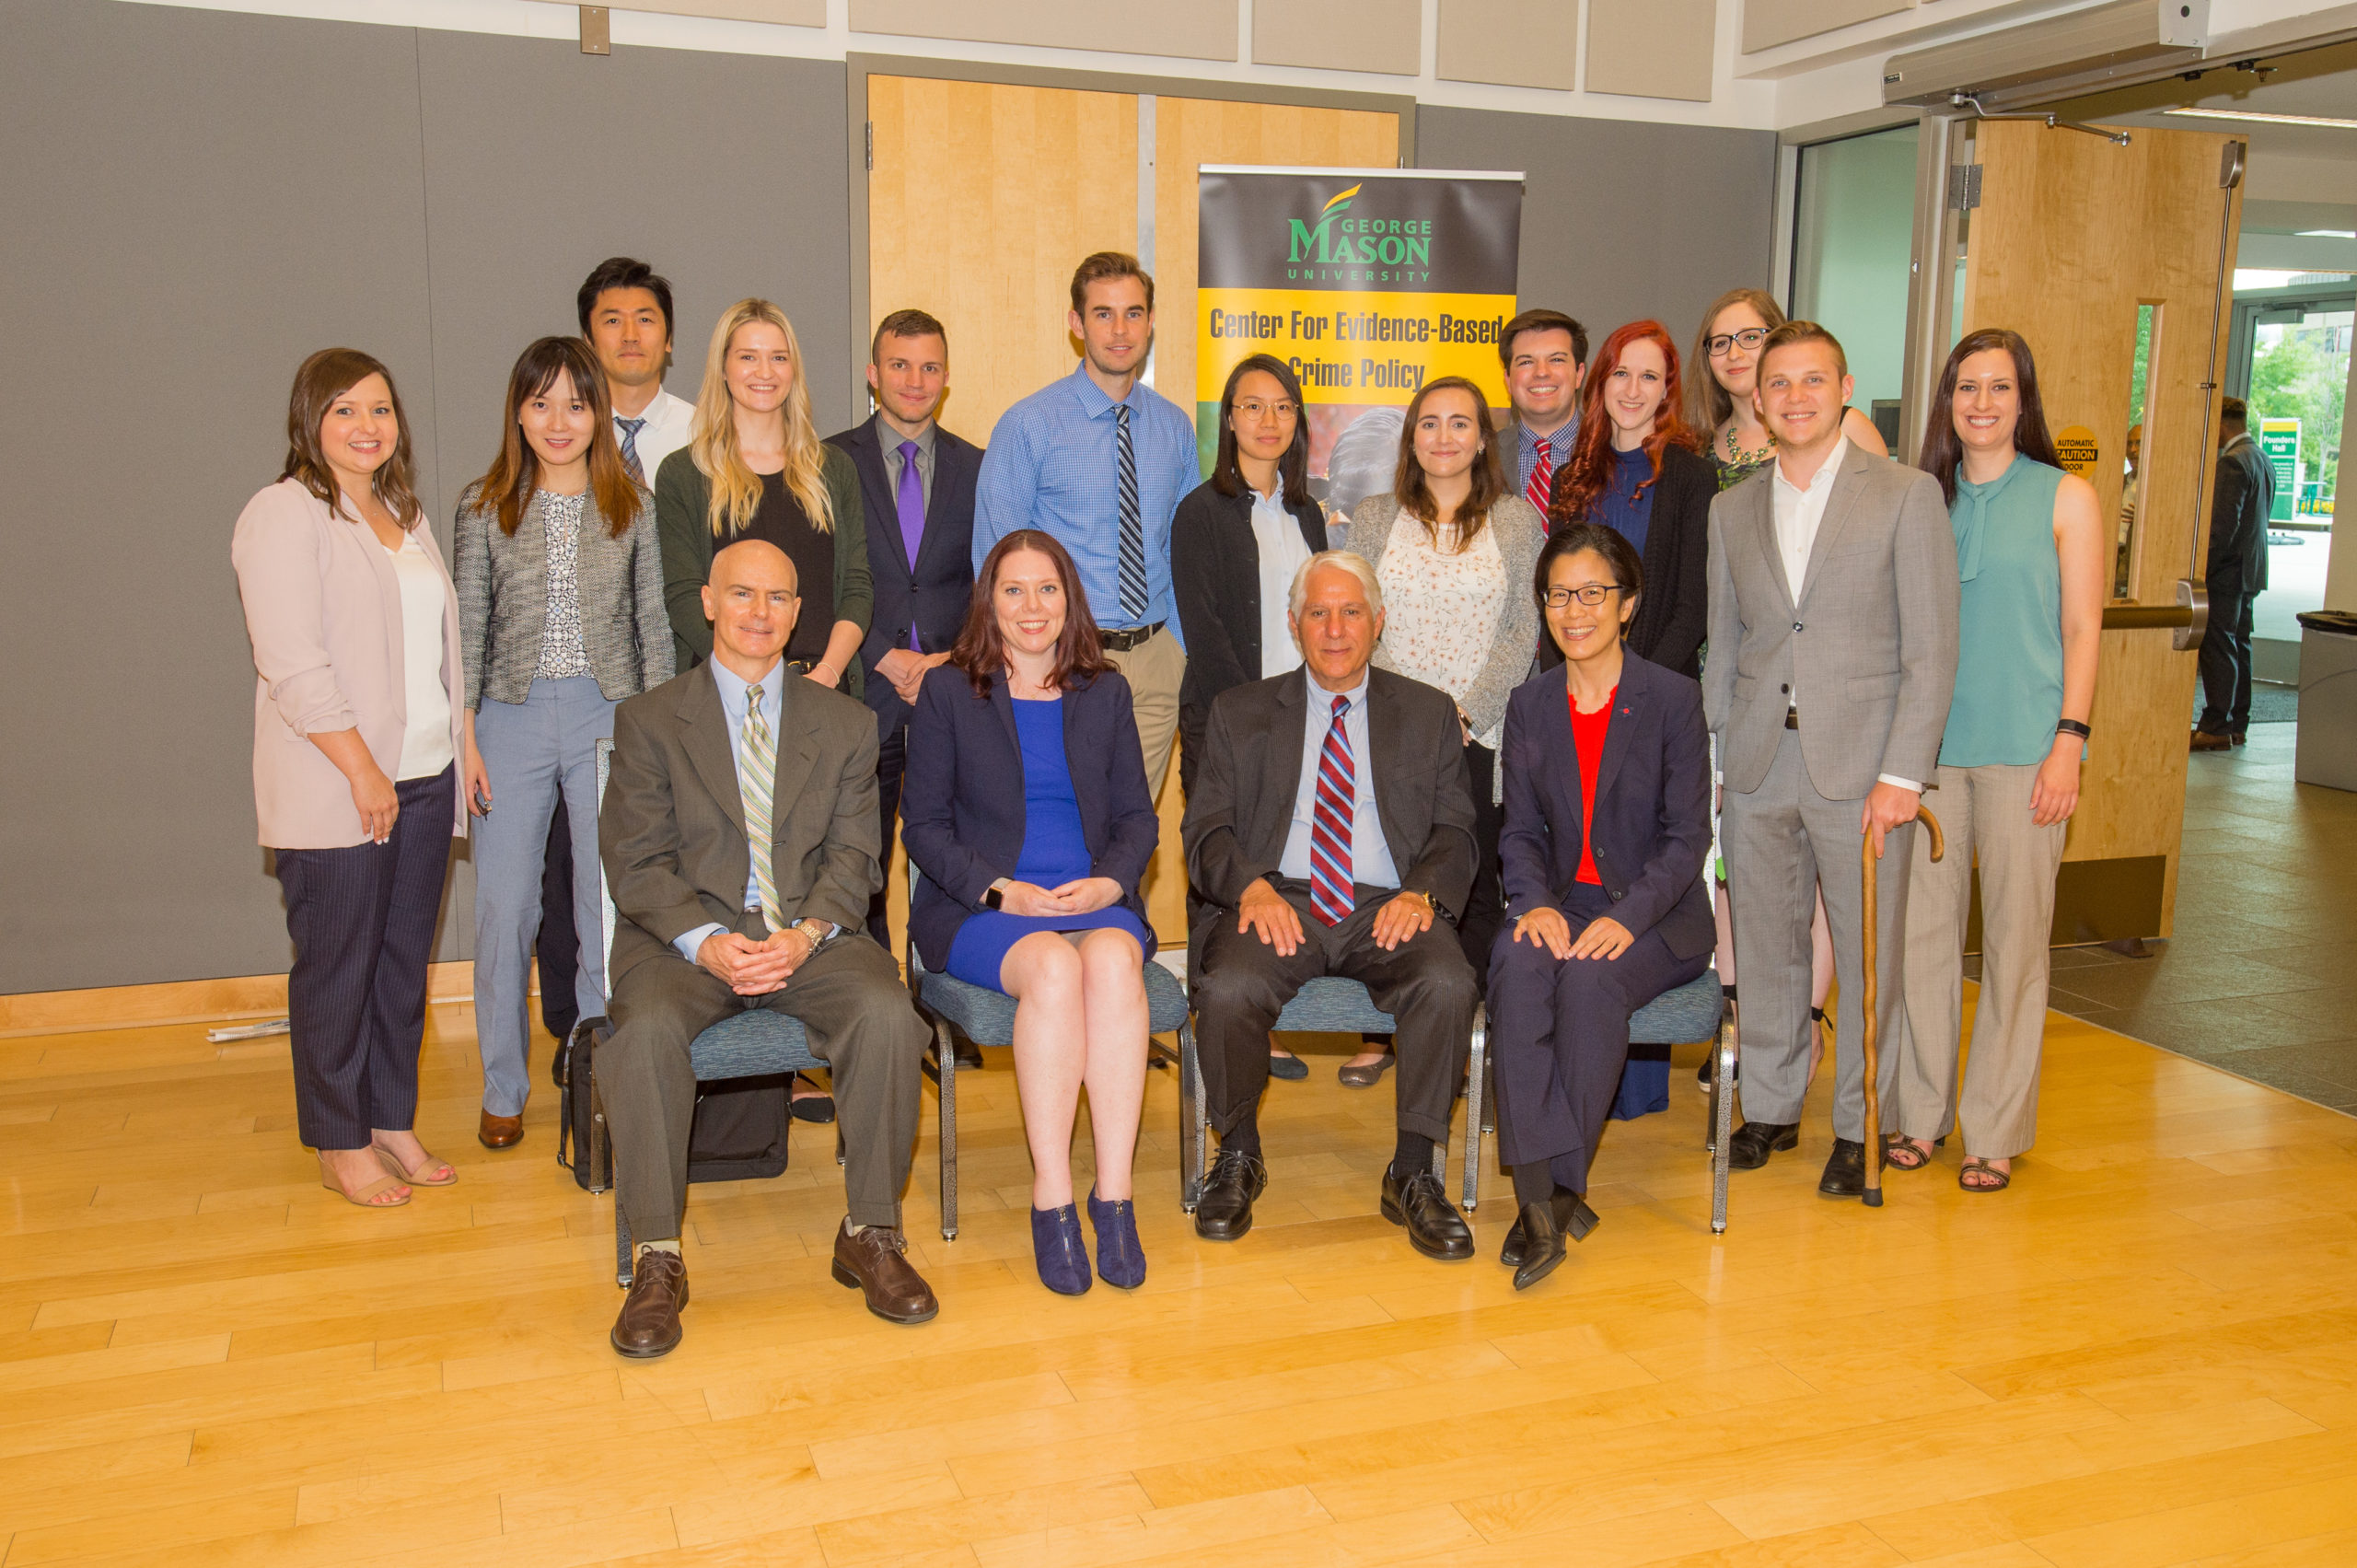 George Mason University, Department of Criminology, Law, and Society - Center for Evidenced-Based Crime Policy 2019 Symposium and Awards Ceremony, at the GMU Arlington Campus, Thursday, June 27, 2019.(Photo by Max Taylor)